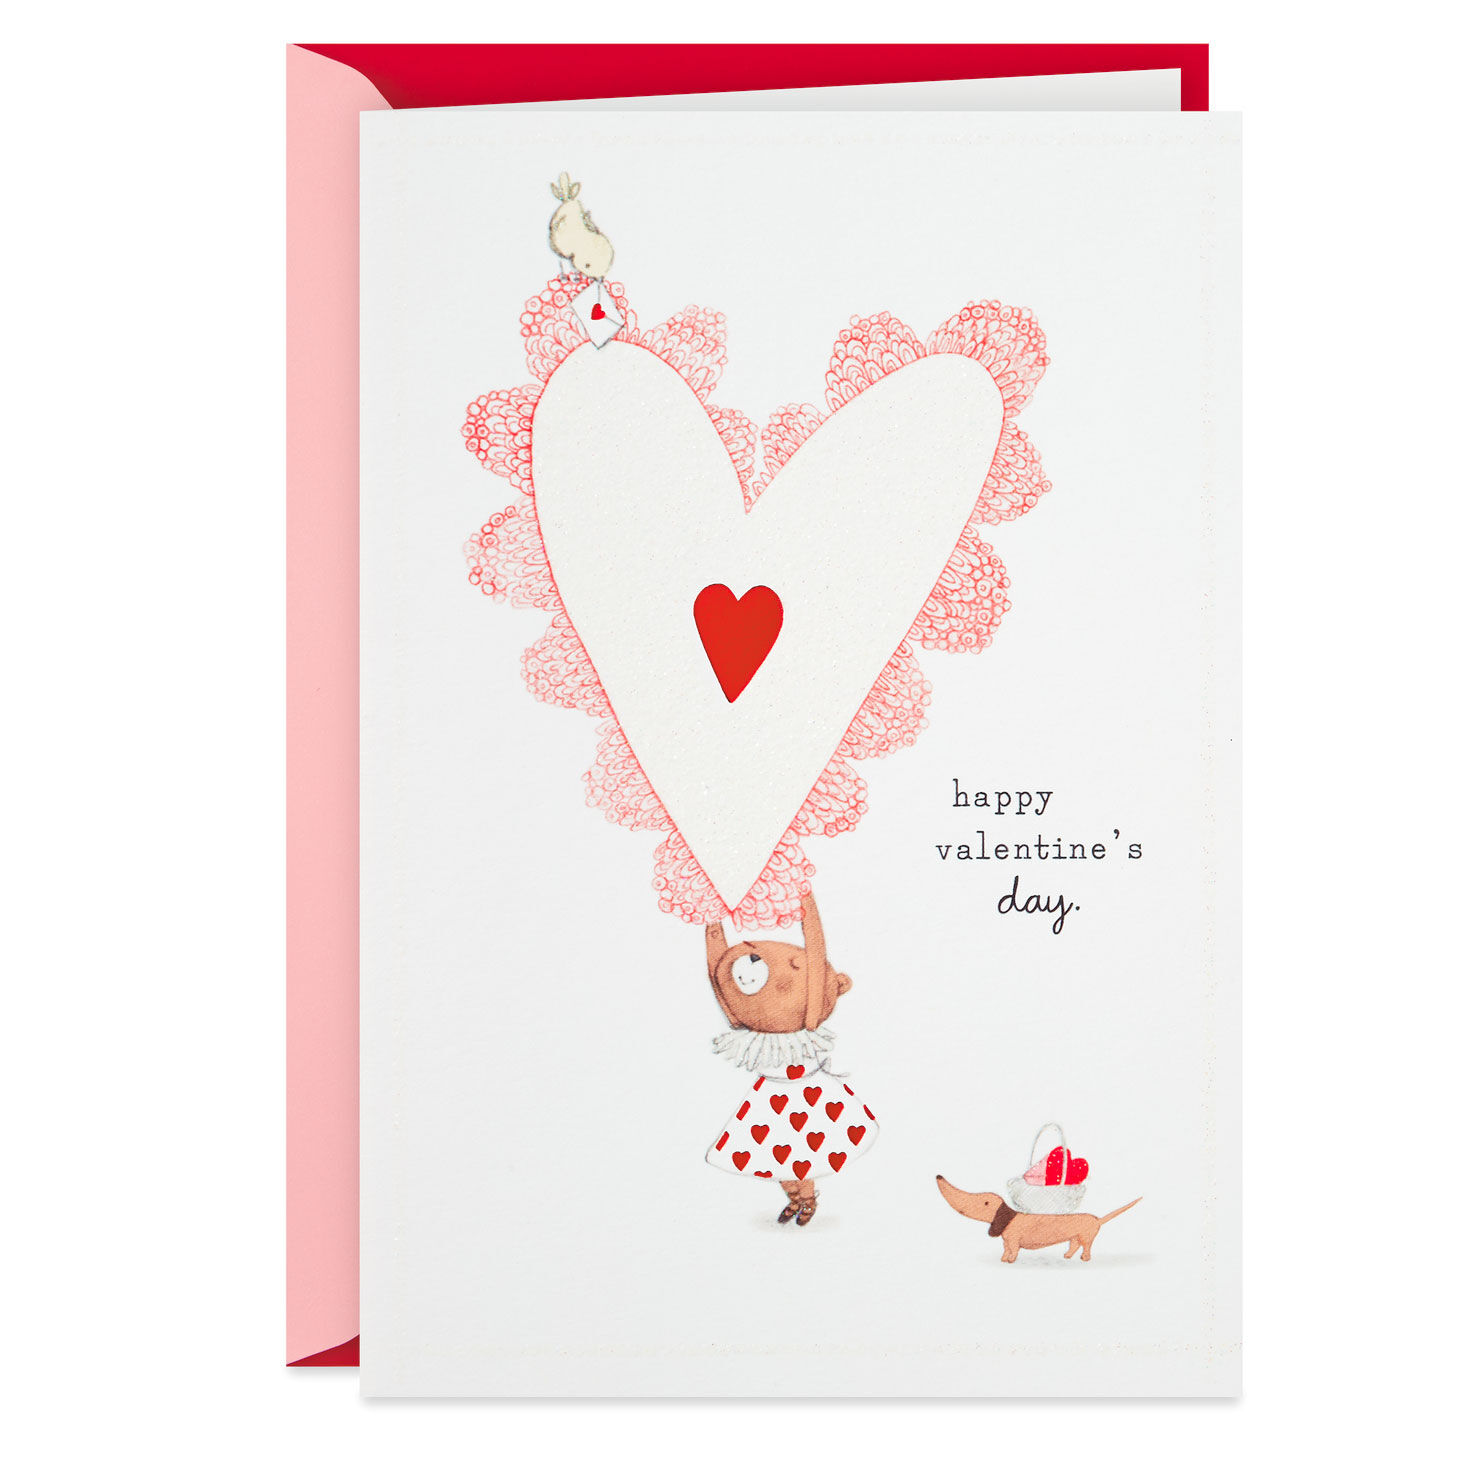 Cute Animals Heart Full of Happy Valentine's Day Card for only USD 2.99 | Hallmark